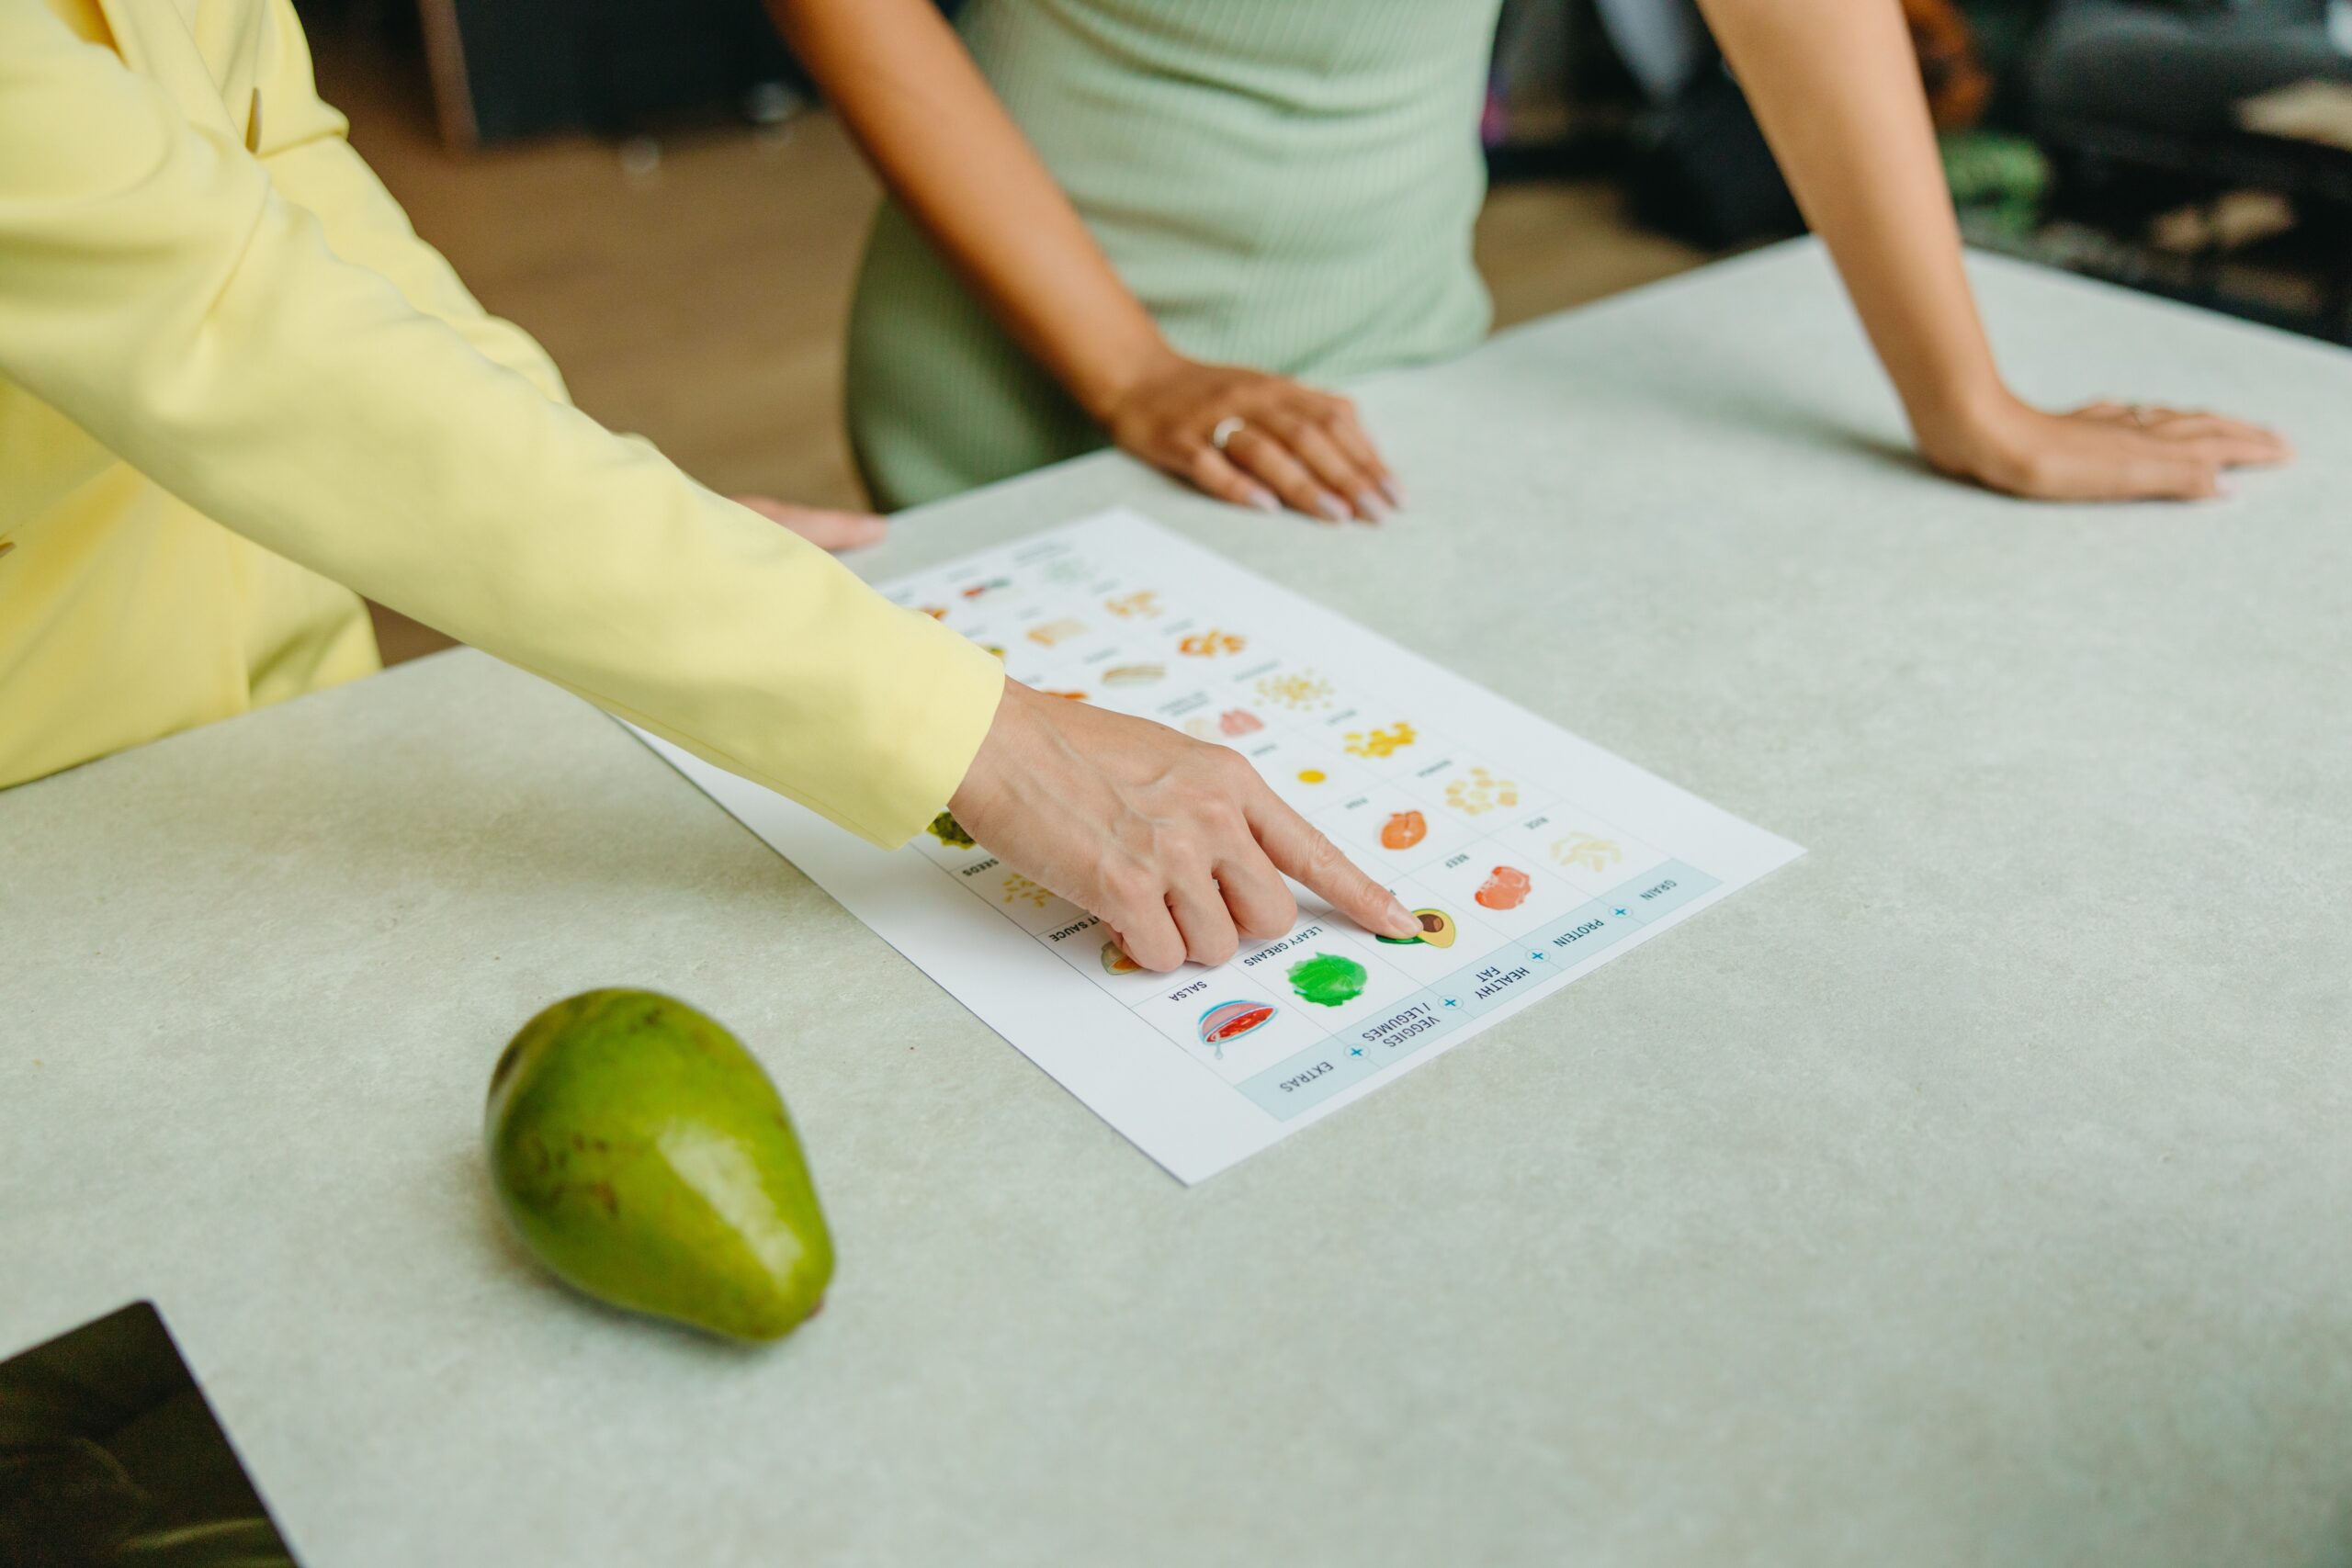 Person pointing at a sheet of paper on a table that shows different types of foods.